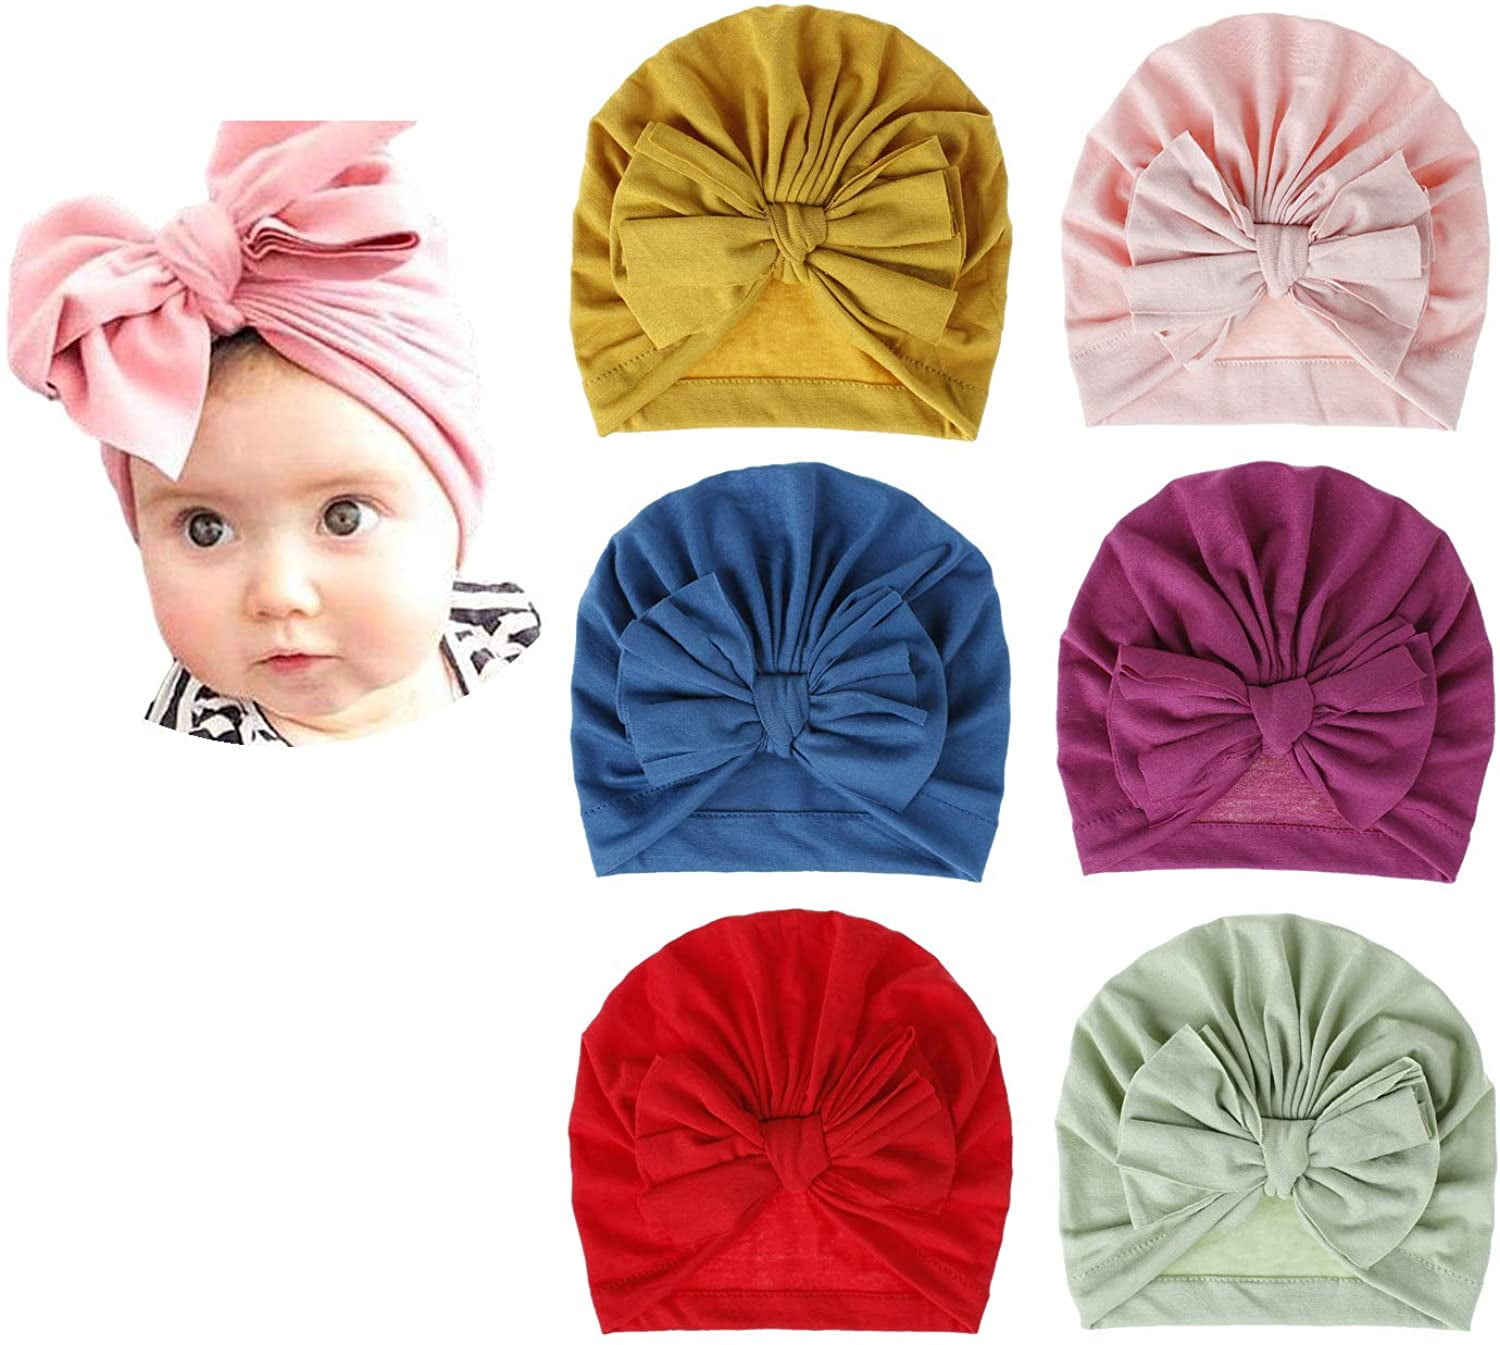 Soft Cotton Newborn Infant Toddler Hospital Hat Cotton Head Wrap,6 Pack Baby Turban Hat Baby Head Wraps with Bow